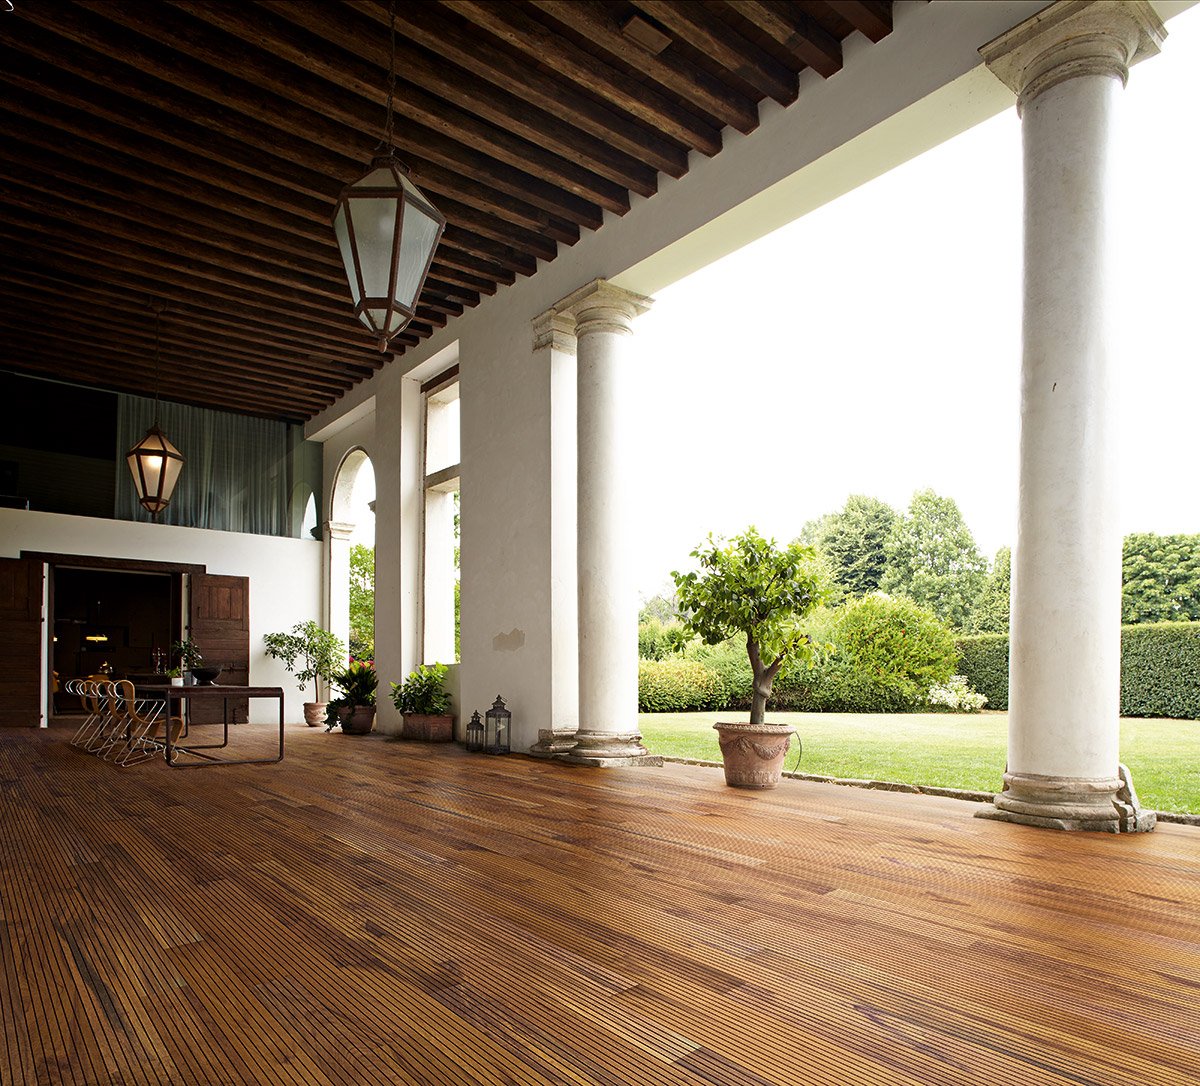 The Warmth of a Wooden Floor for Outdoor Living